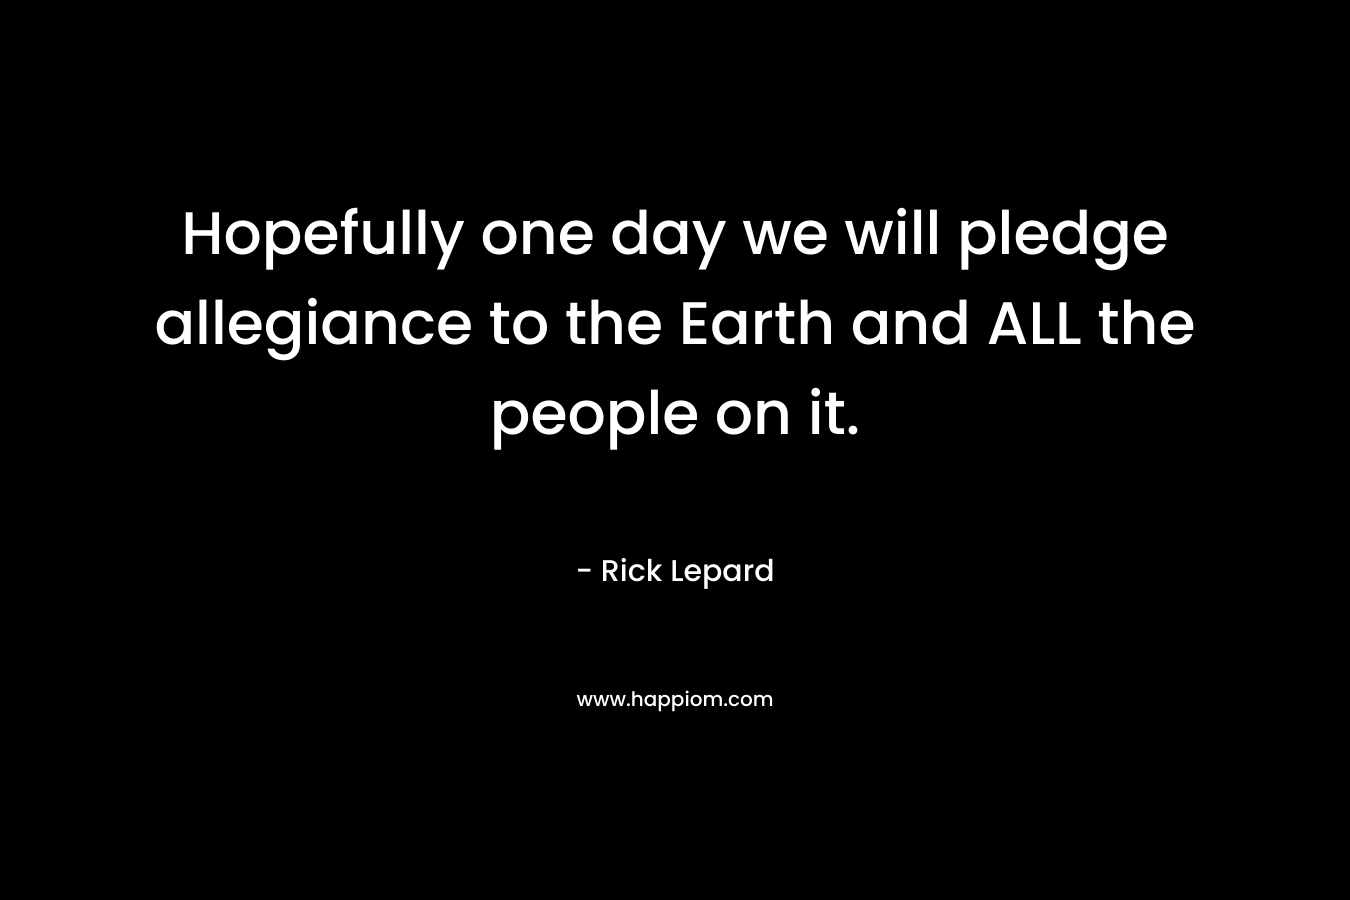 Hopefully one day we will pledge allegiance to the Earth and ALL the people on it.